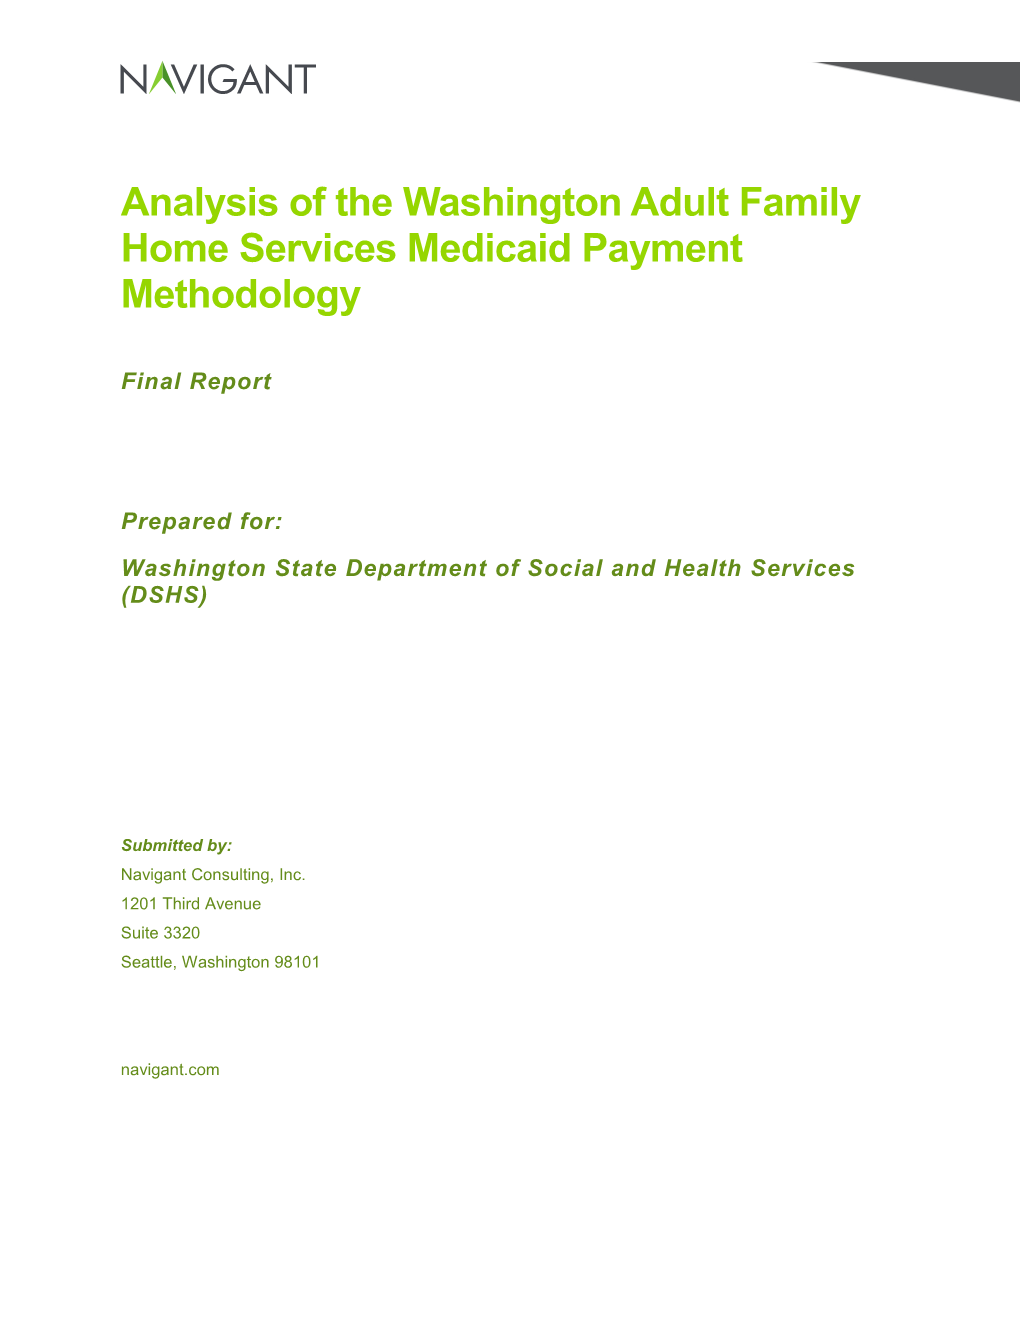 Analysis of the Washington Adult Family Home Servicesmedicaid Payment Methodology